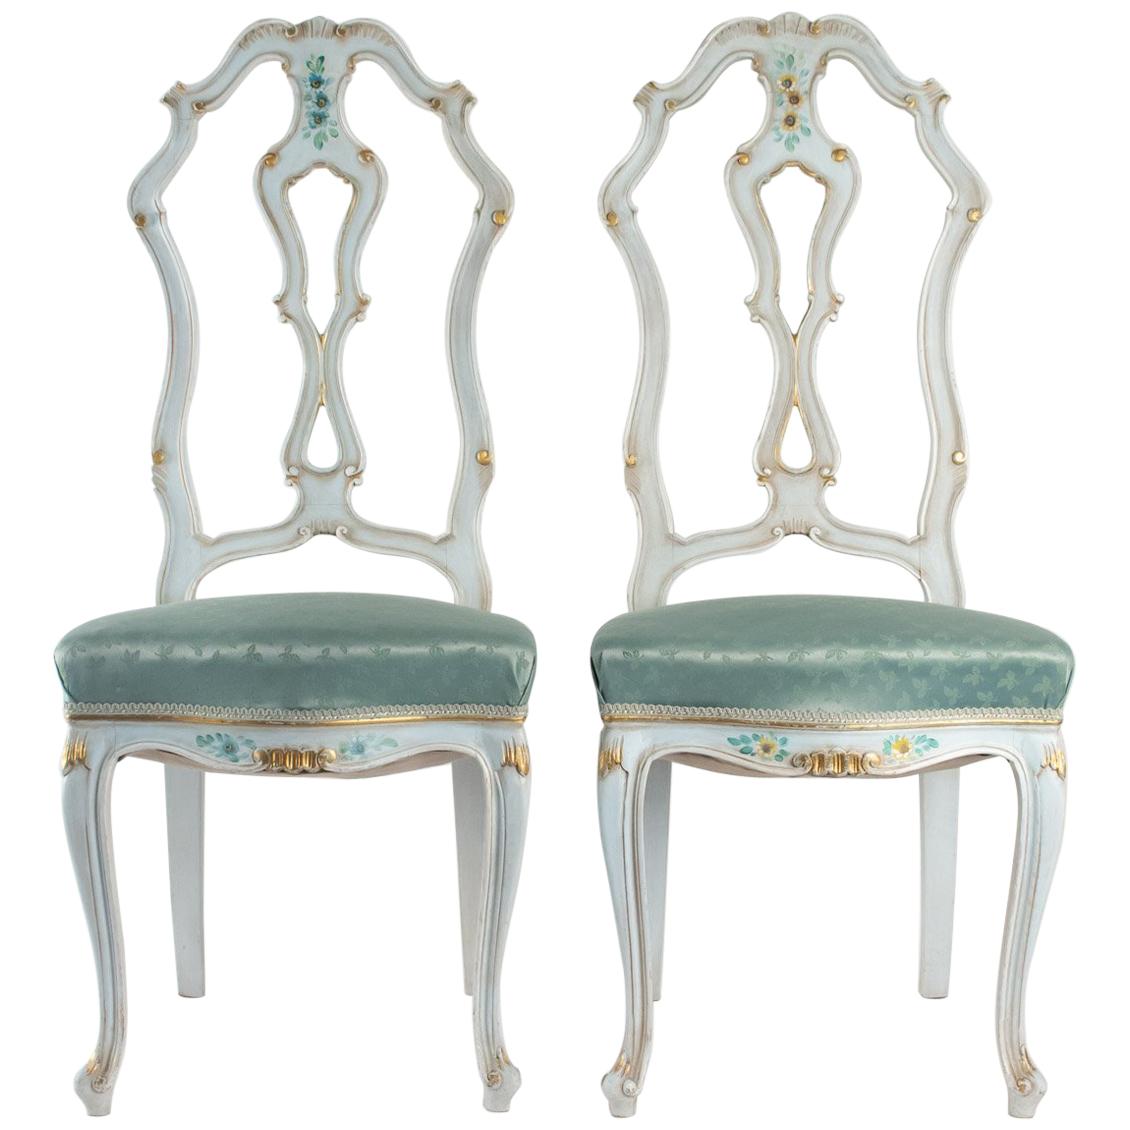 Venetian Dining Room Chairs For Sale